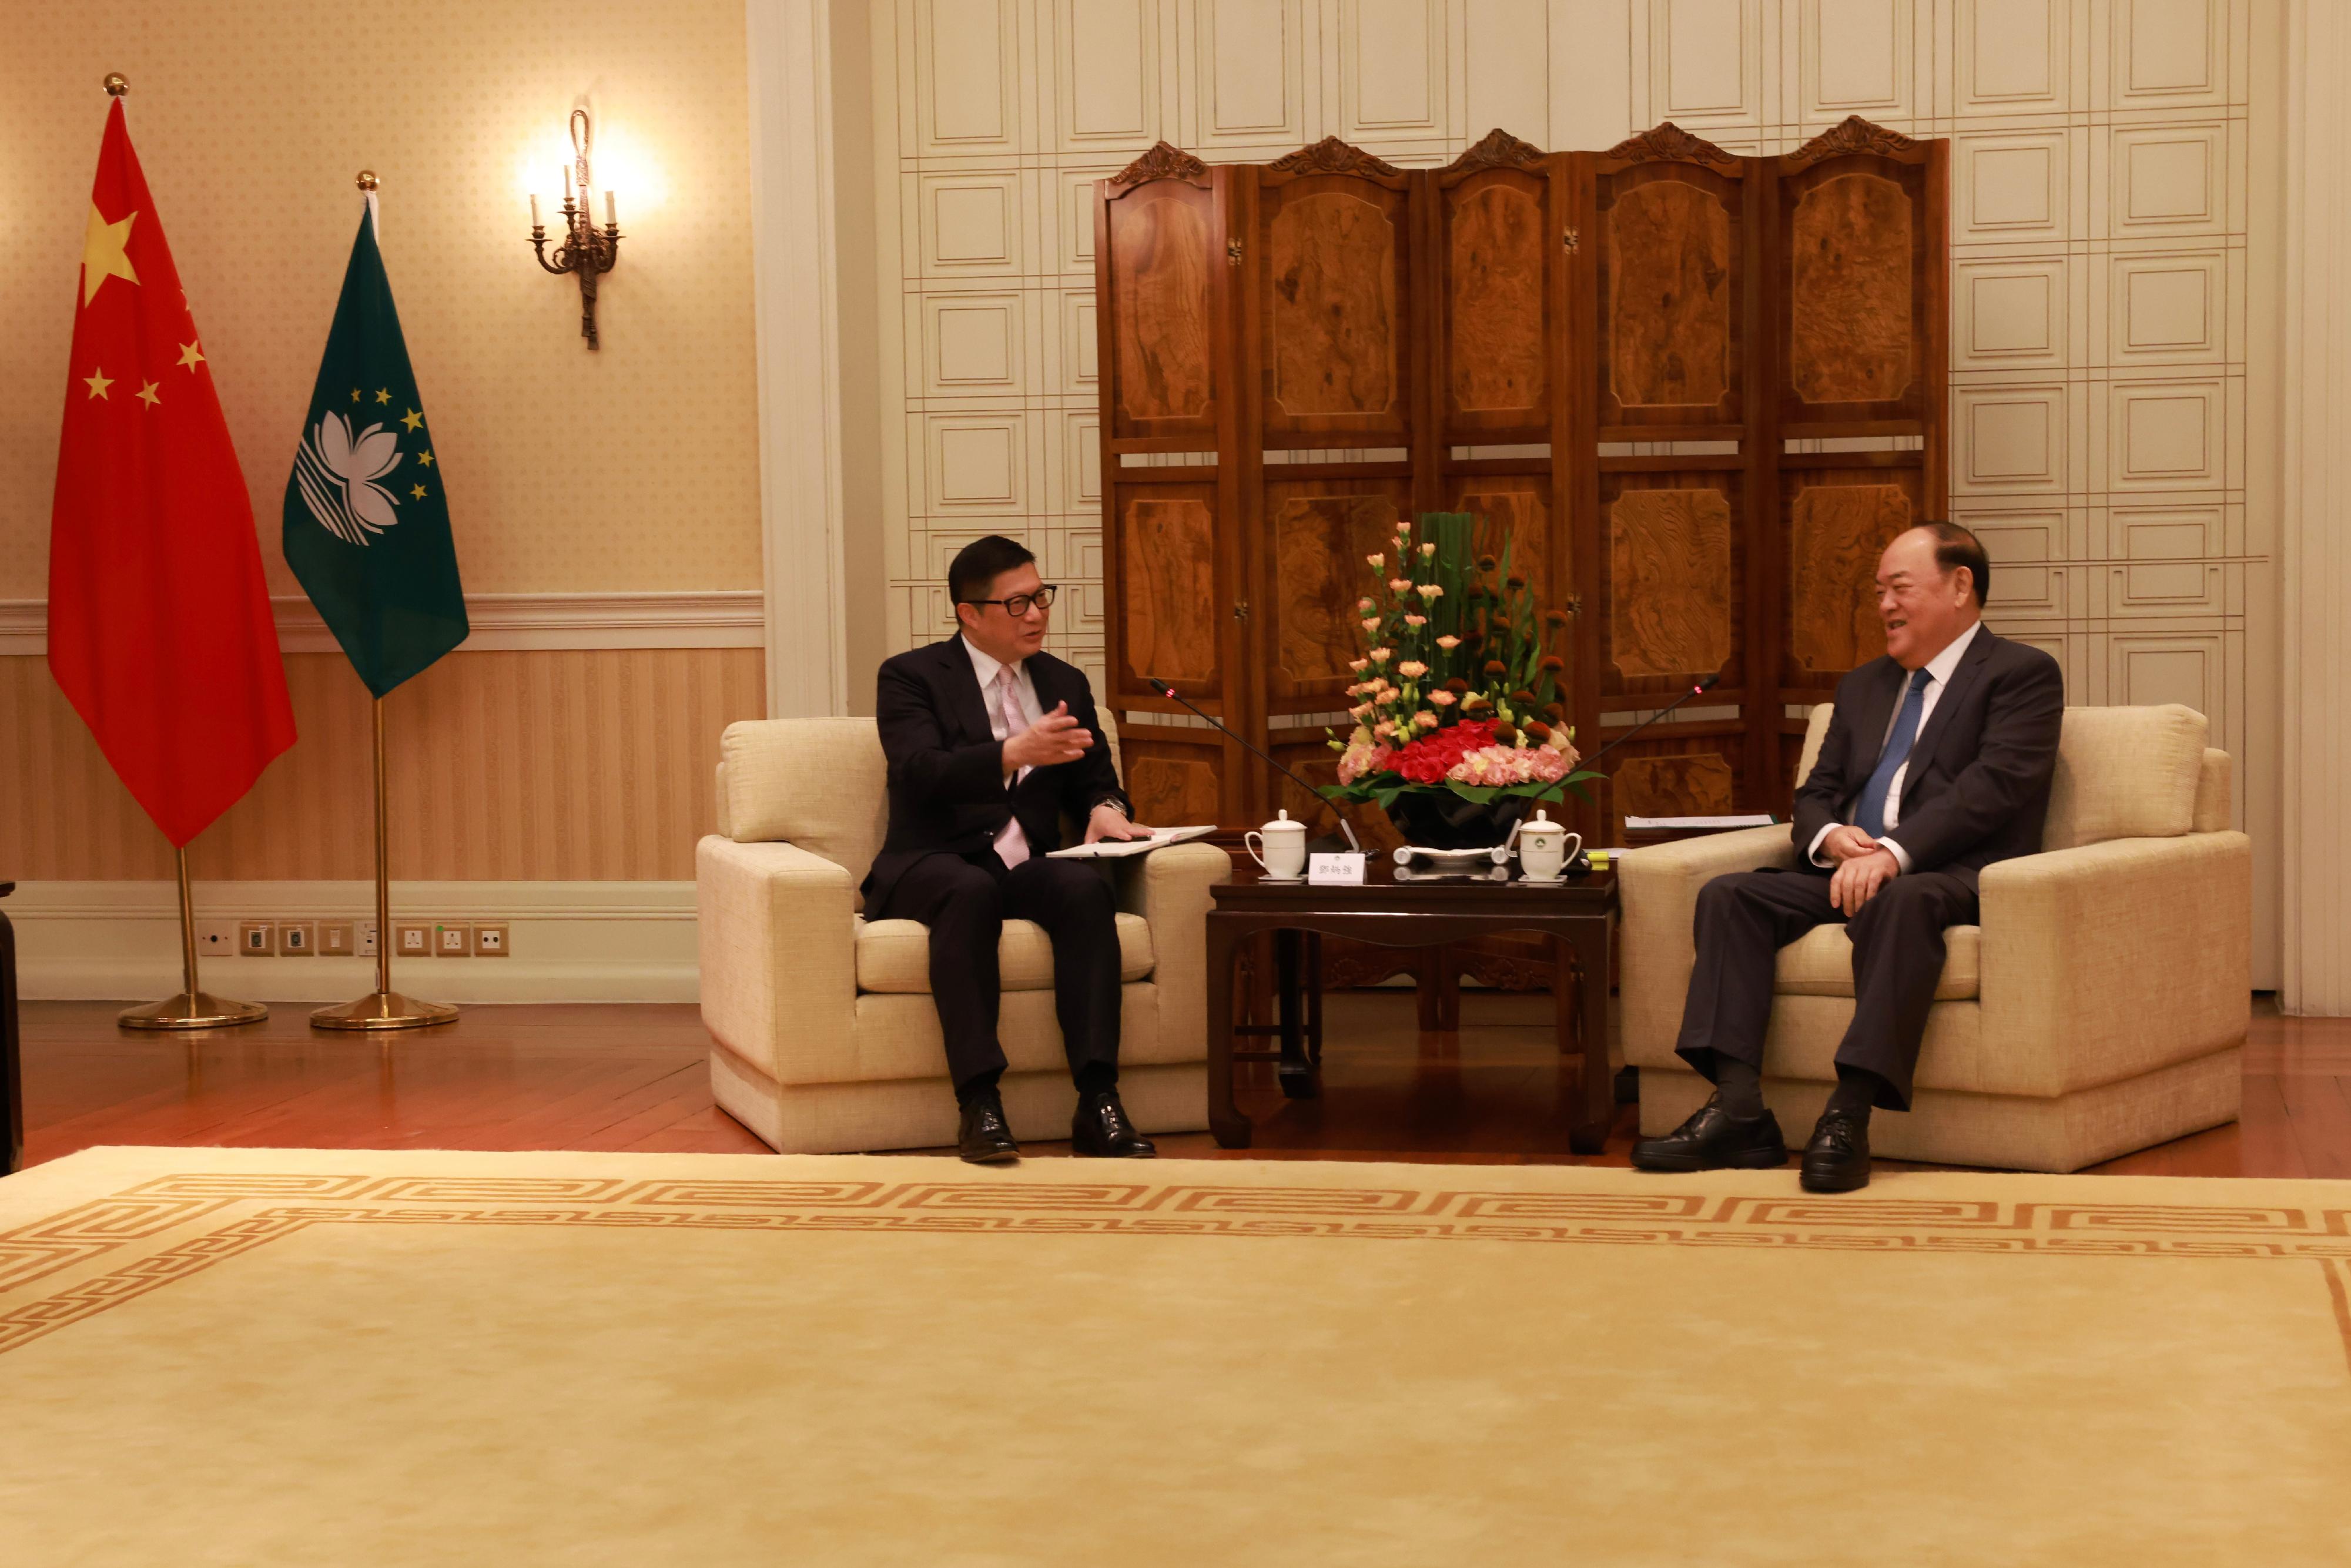 The Secretary for Security, Mr Tang Ping-keung, arrived in Macao this morning (June 20) to start his two-day visit to the Guangdong-Hong Kong-Macao Greater Bay Area and call on public security units there. Photo shows Mr Tang (left) calling on the Chief Executive of the Macao Special Administrative Region, Mr Ho Iat-seng.